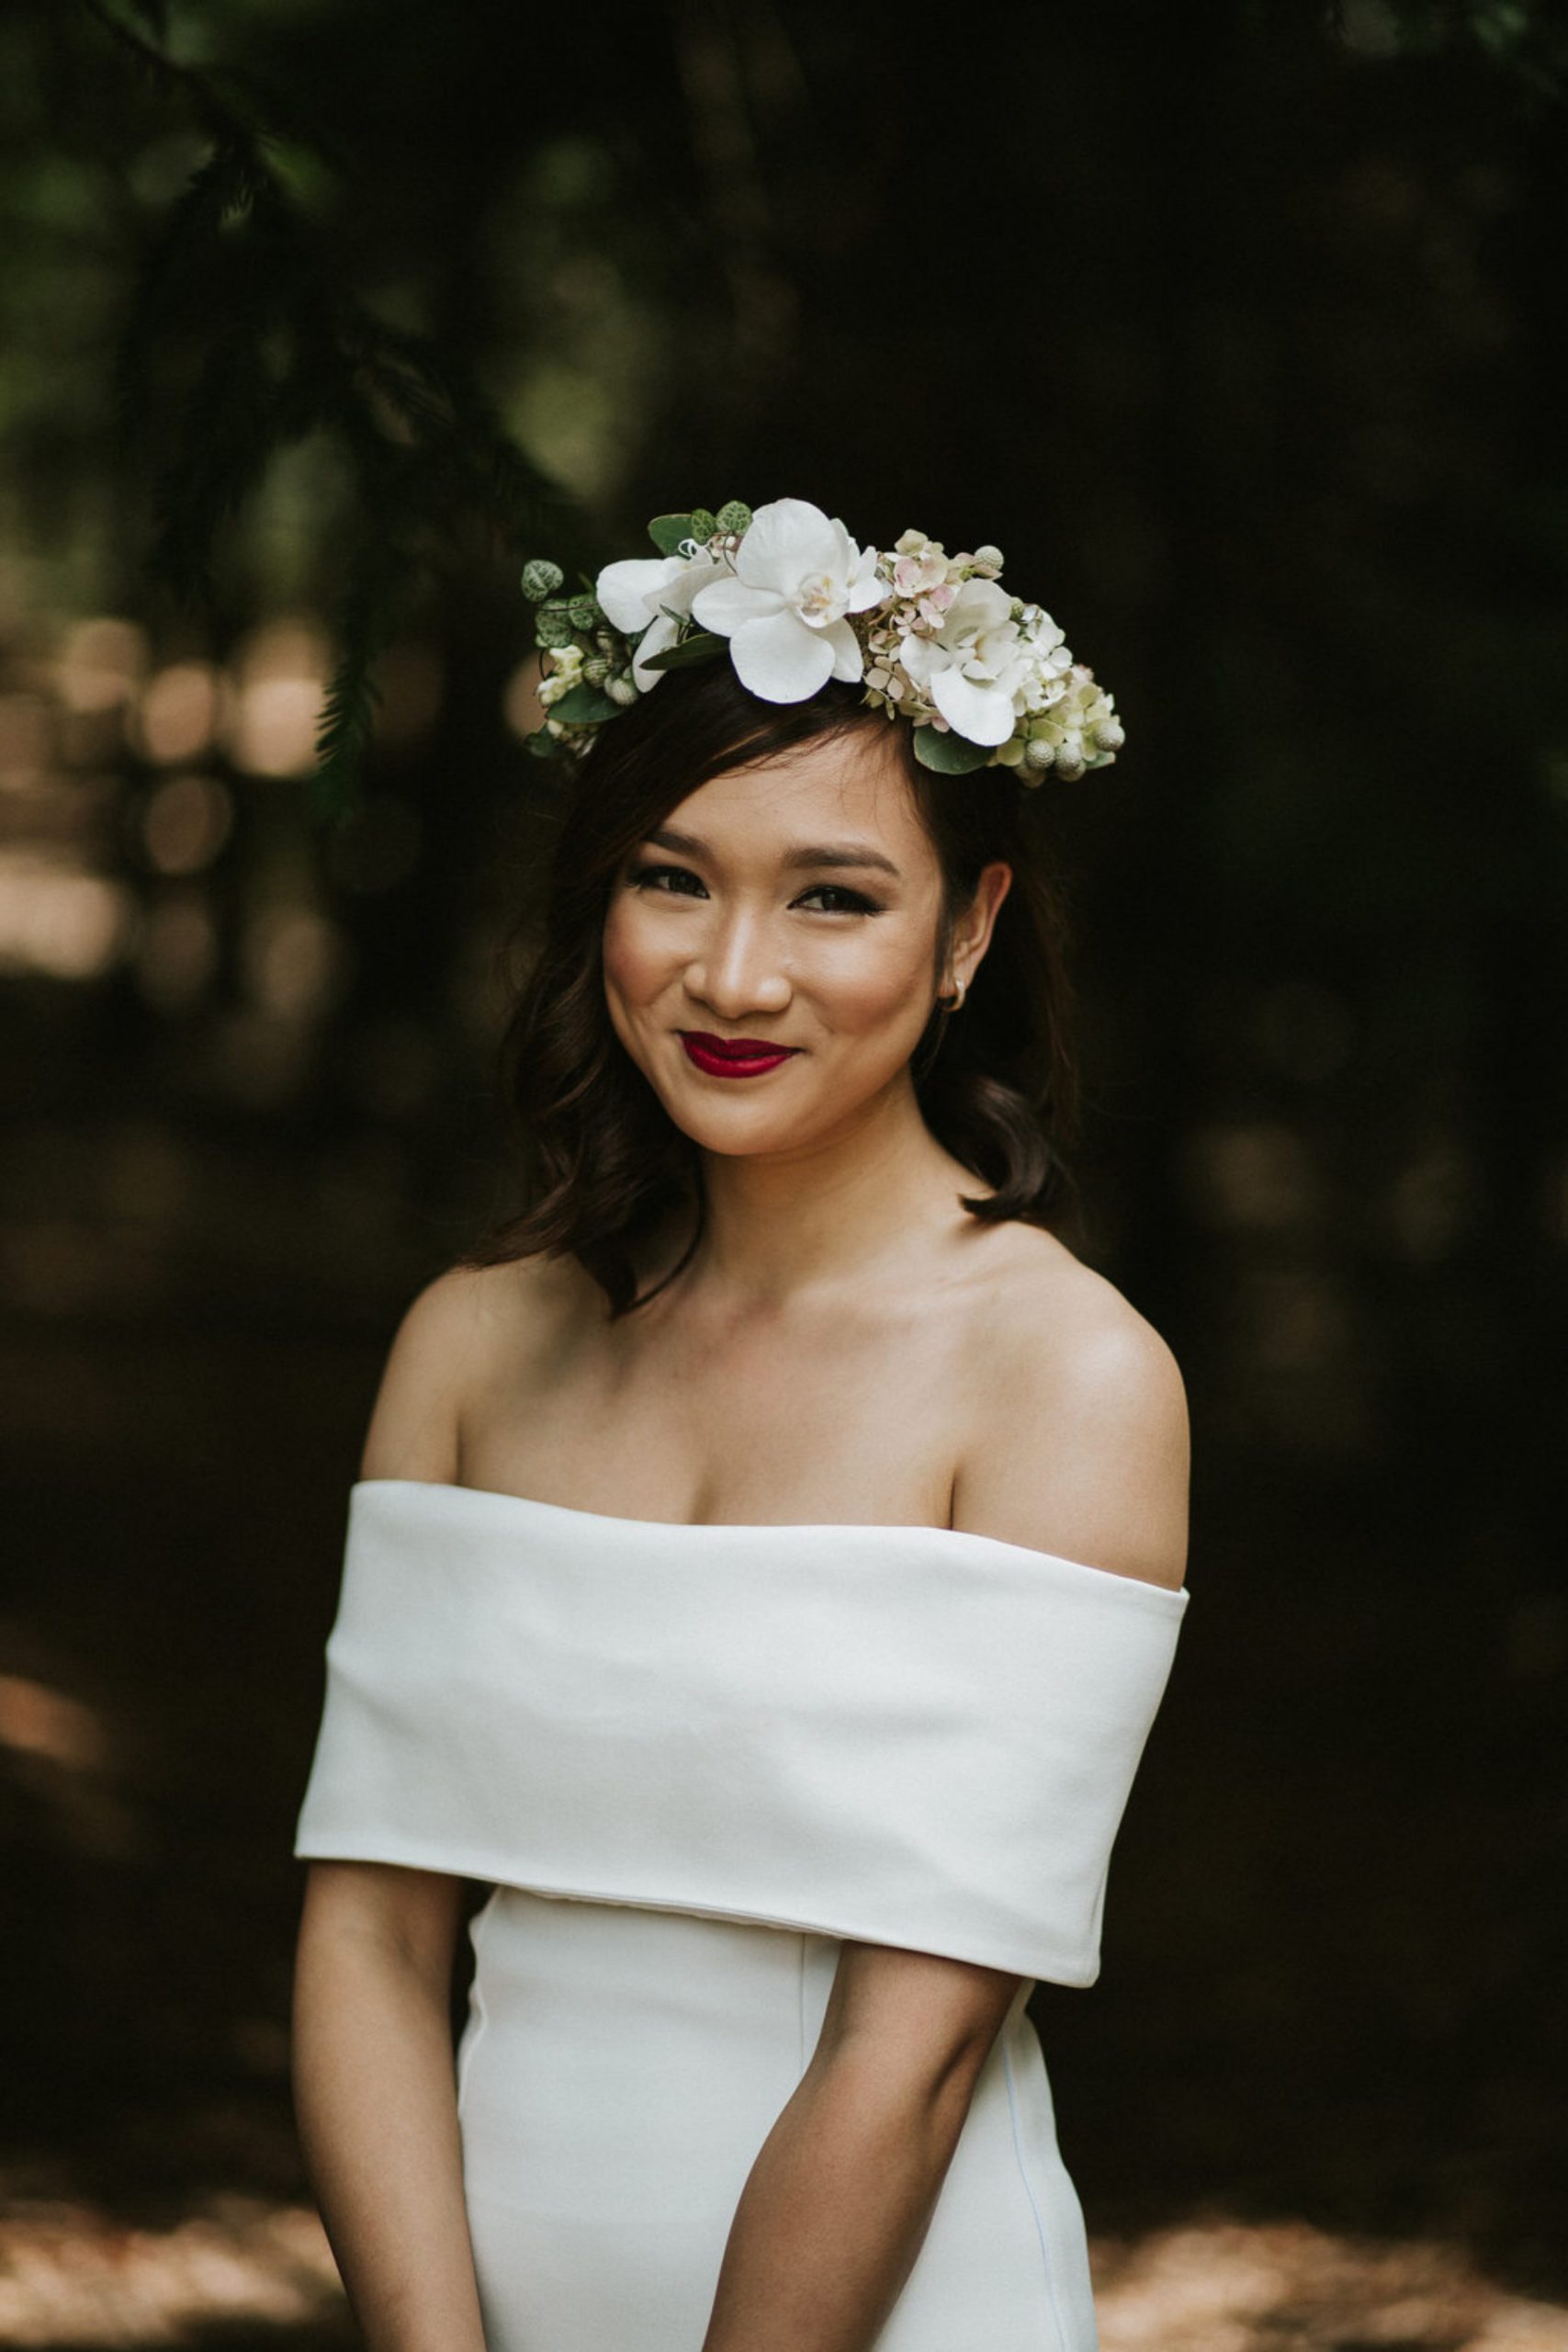 bride wearing off the shoulders wedding dress, red lipstick and all white flowers floral crown